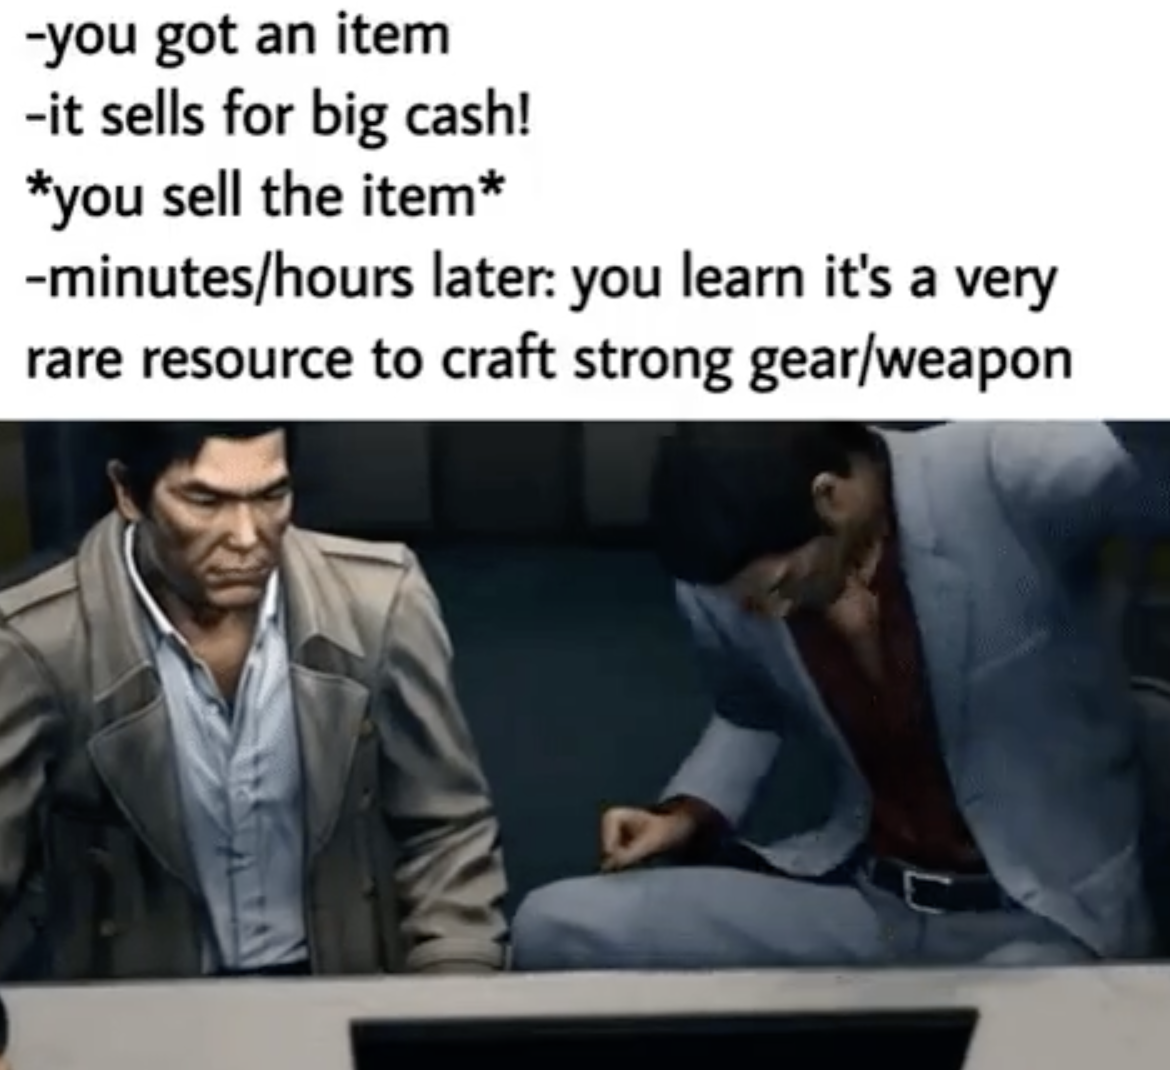 gaming memes - conversation - you got an item it sells for big cash! you sell the item minuteshours later you learn it's a very rare resource to craft strong gearweapon